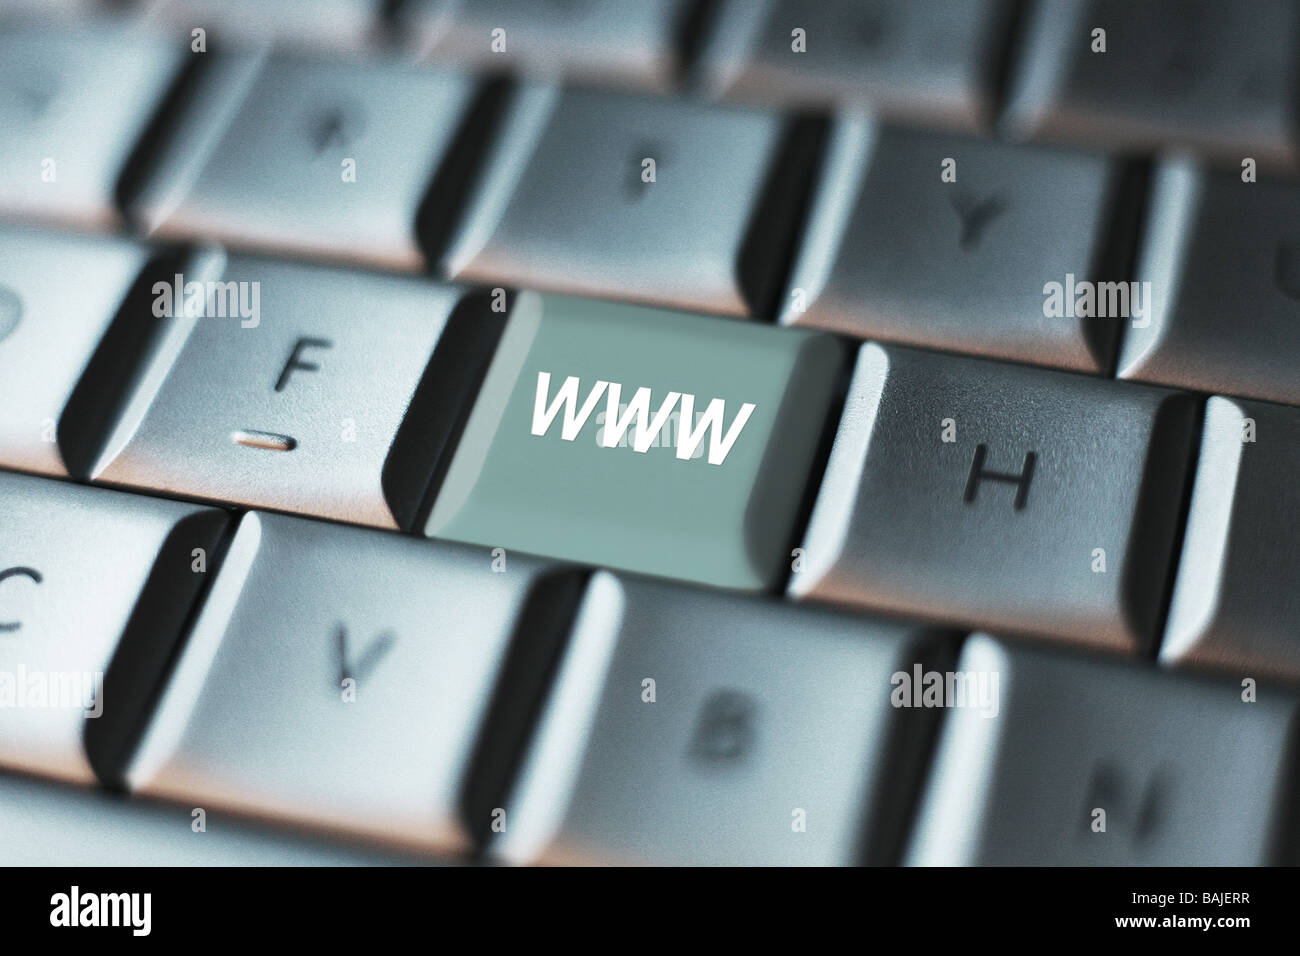 world wide web www Email Button on a Computer KeyBoard Stock Photo